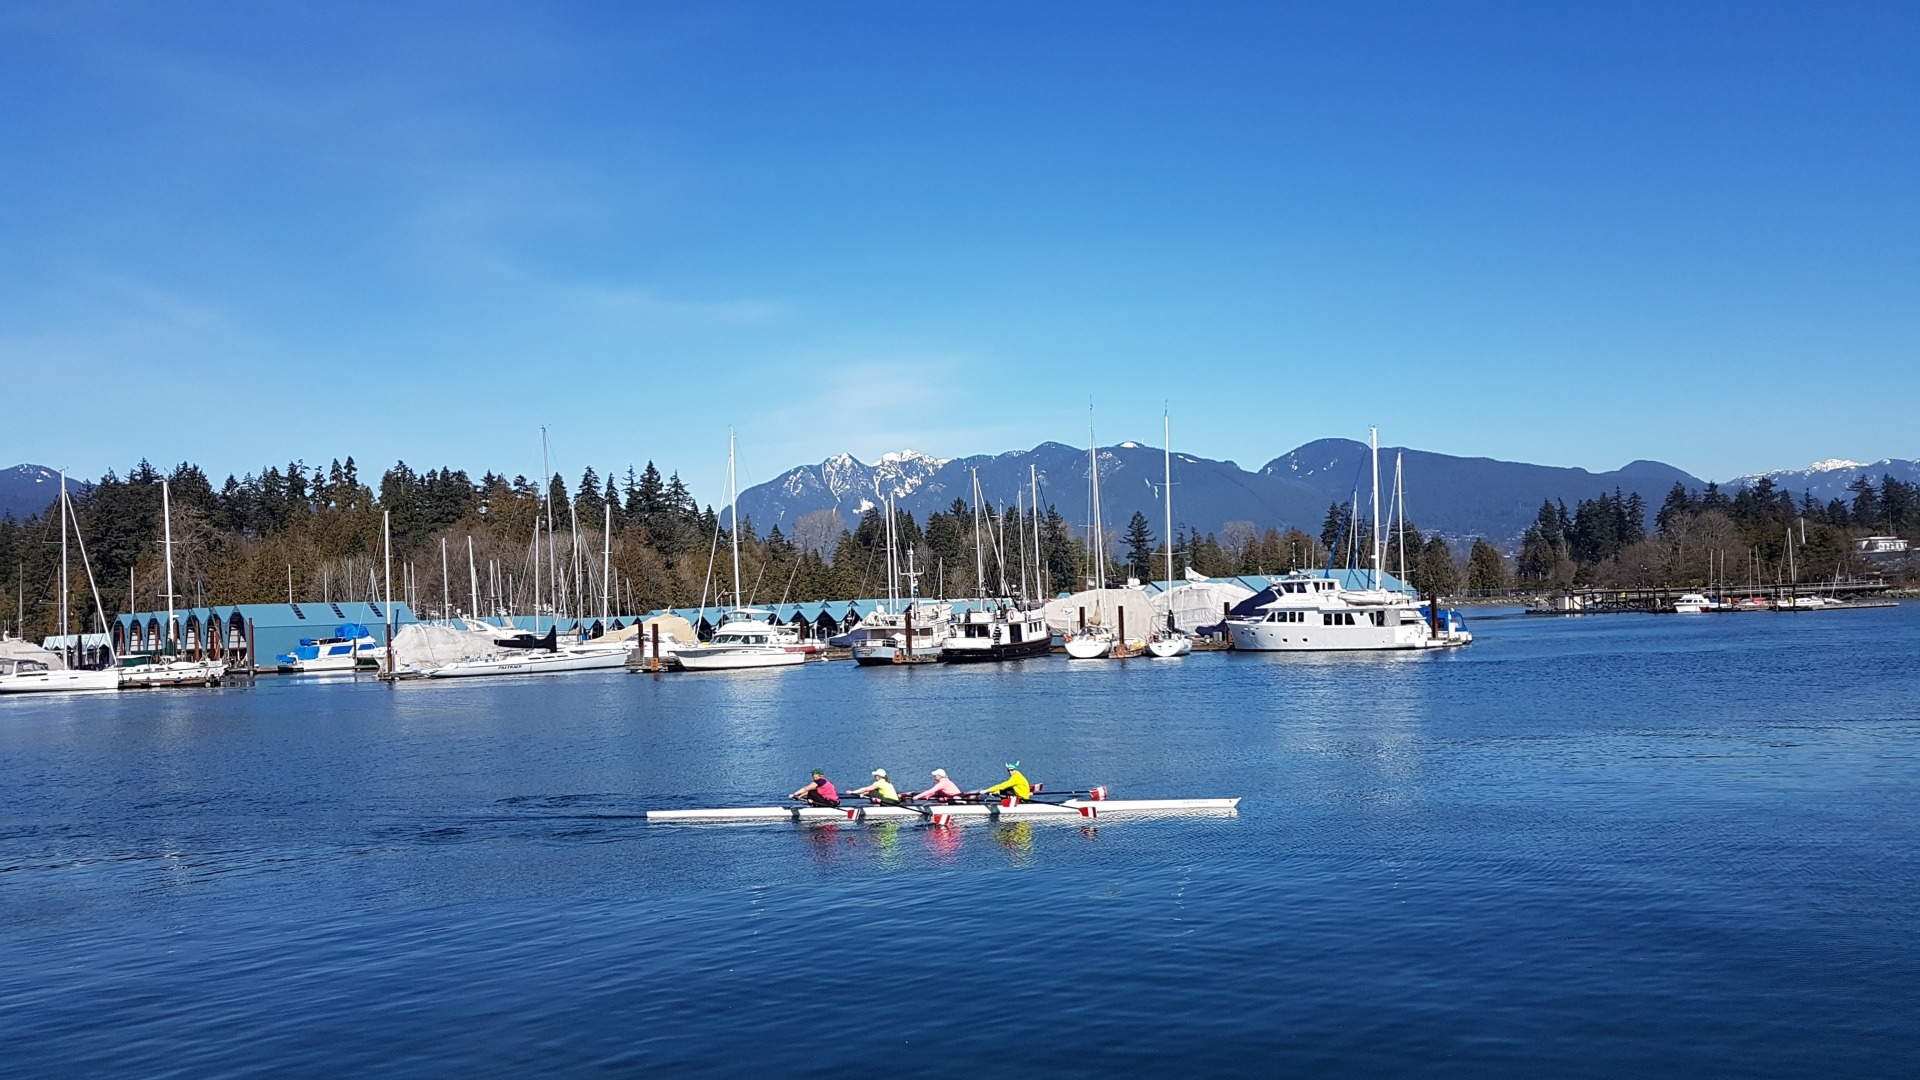 rowers-in-vancouver-20190317_130922